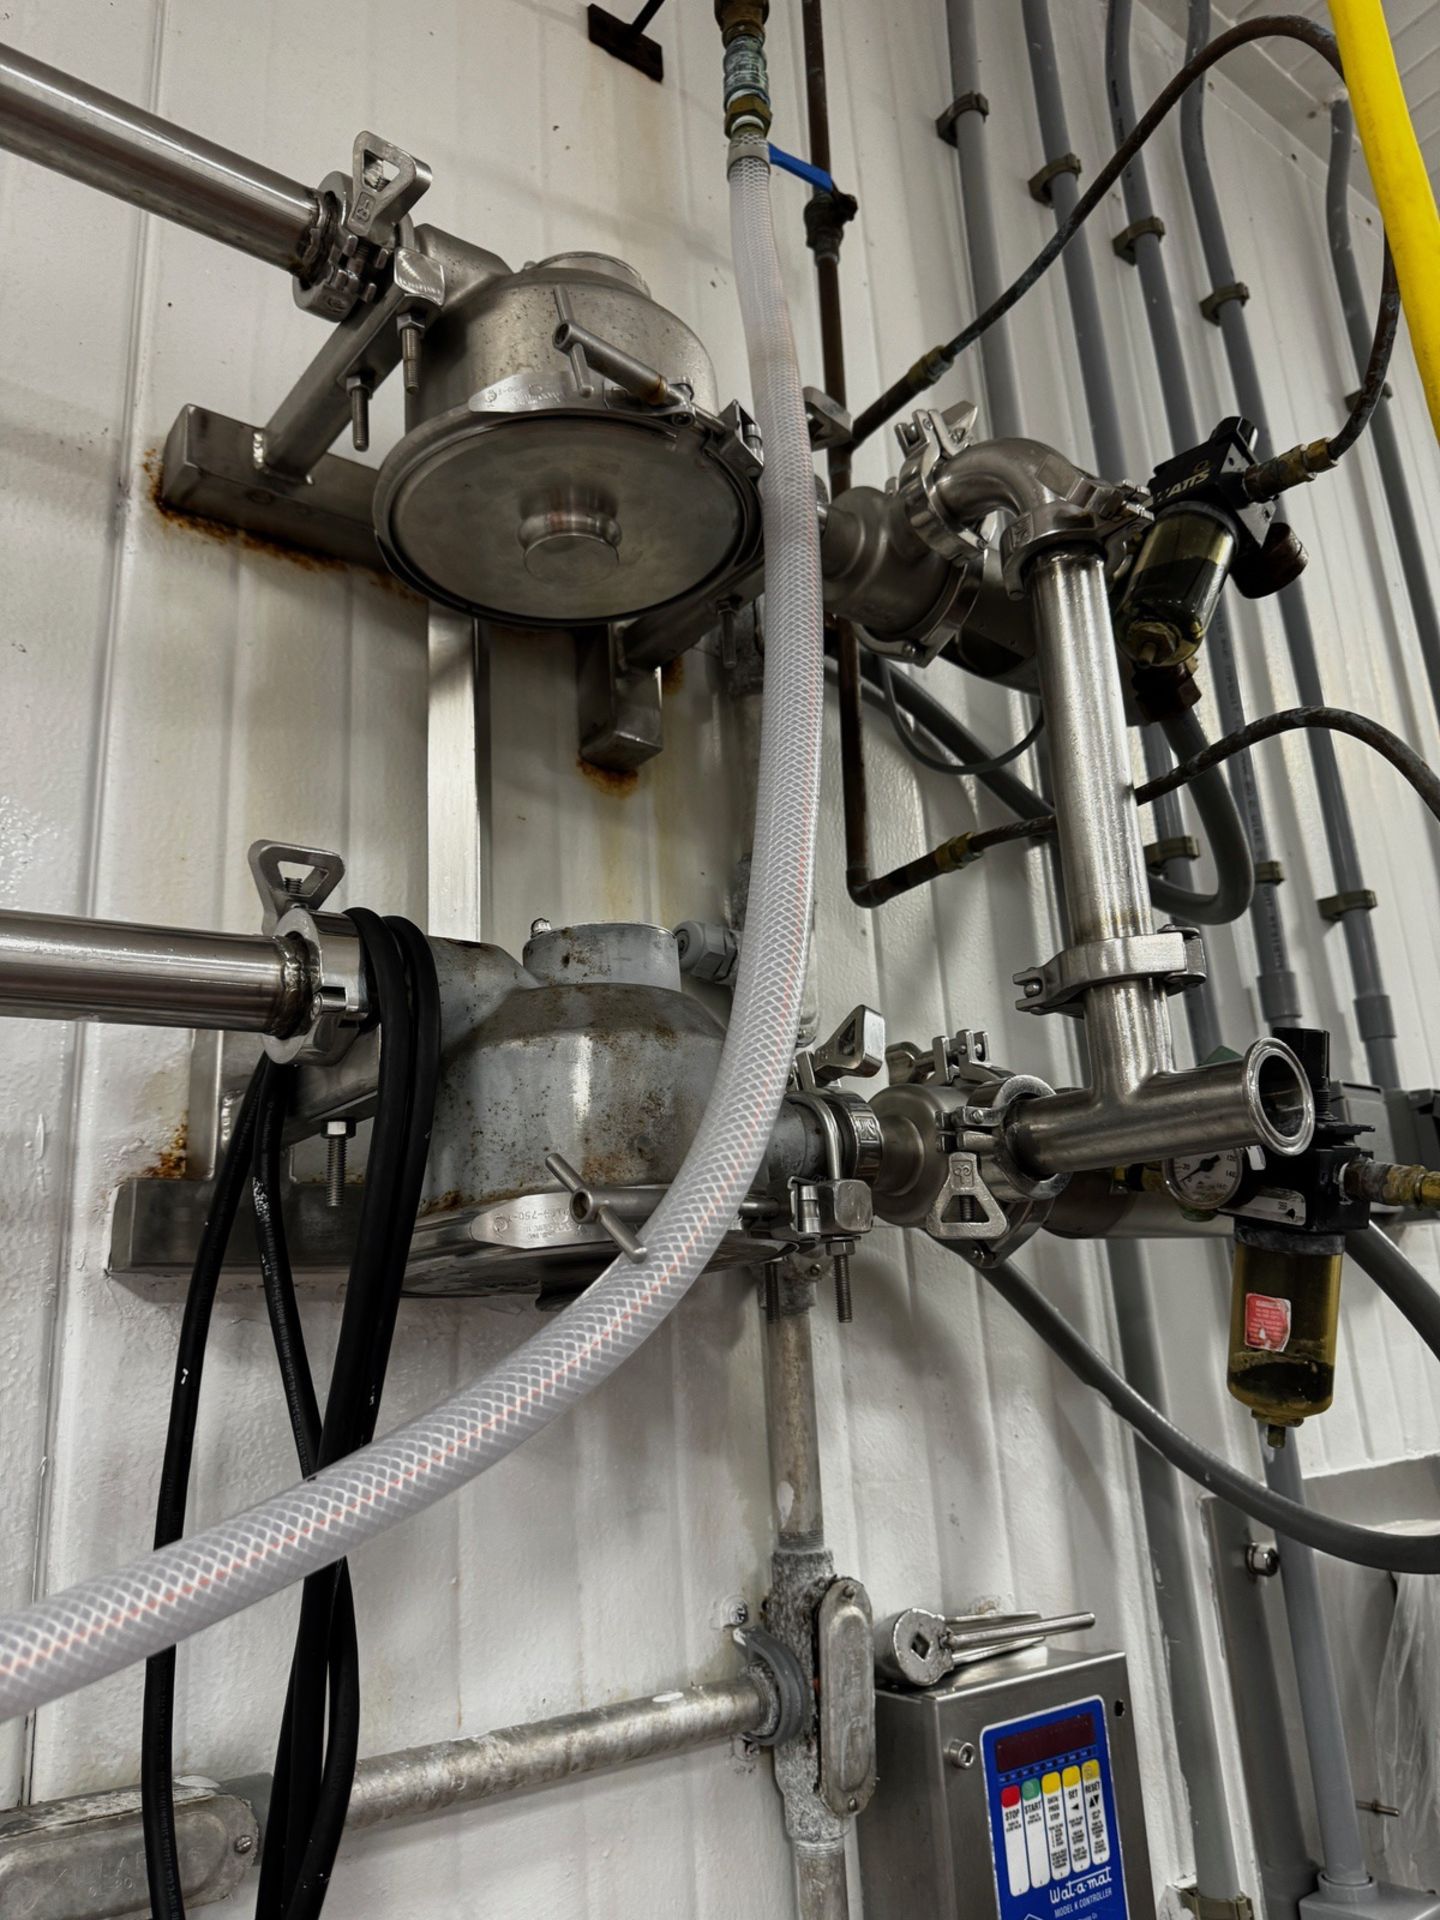 Balance of Valves and Stainless Piping in Pesto Production Room - Image 3 of 4